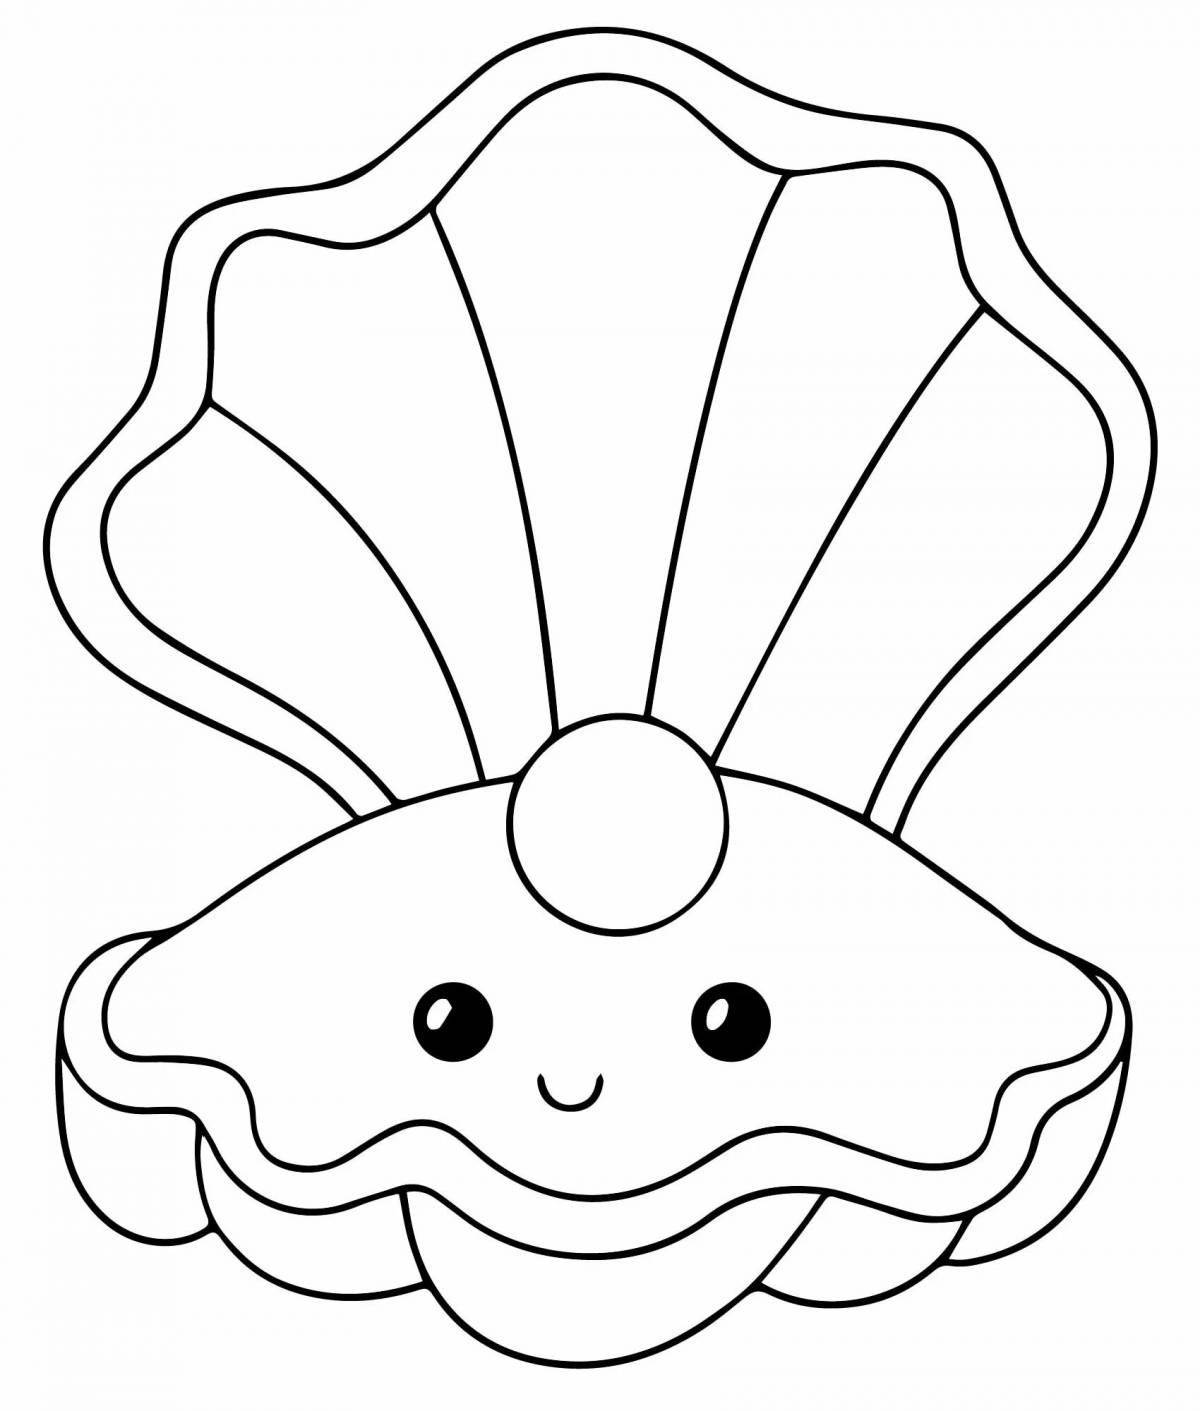 Coloring page of dazzling gems for kids